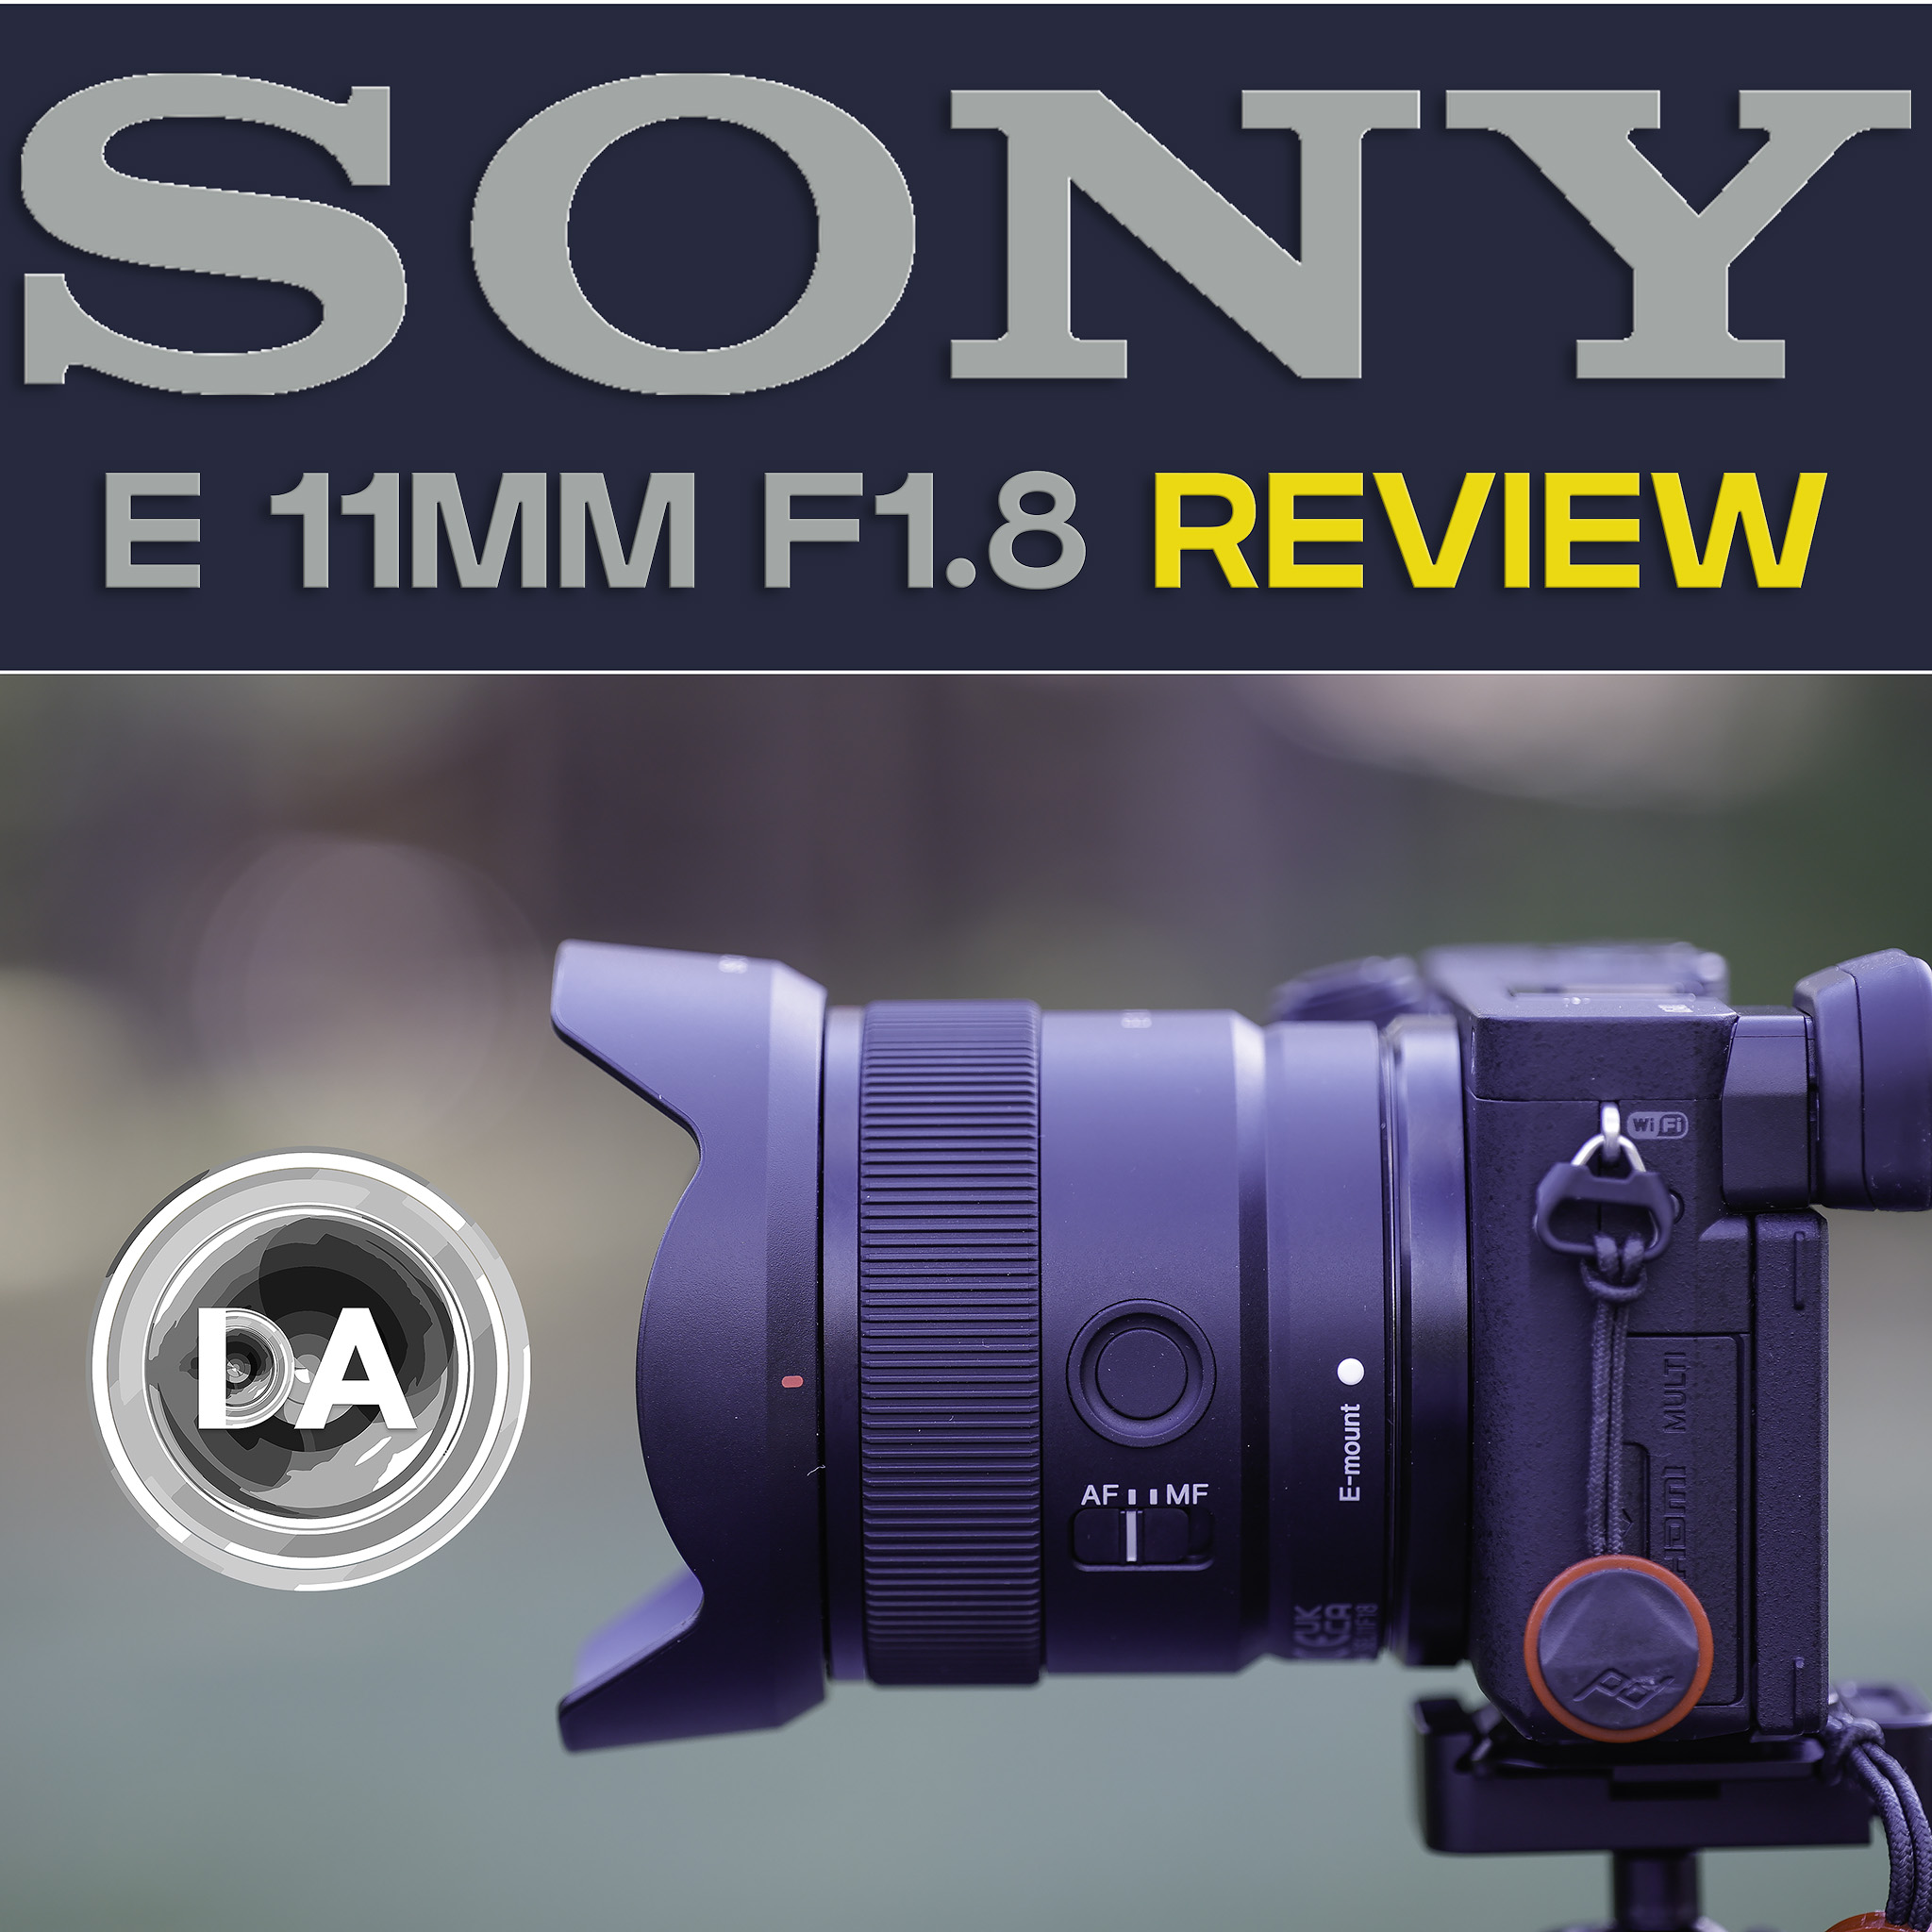 E Review F1.8 Sony 11mm